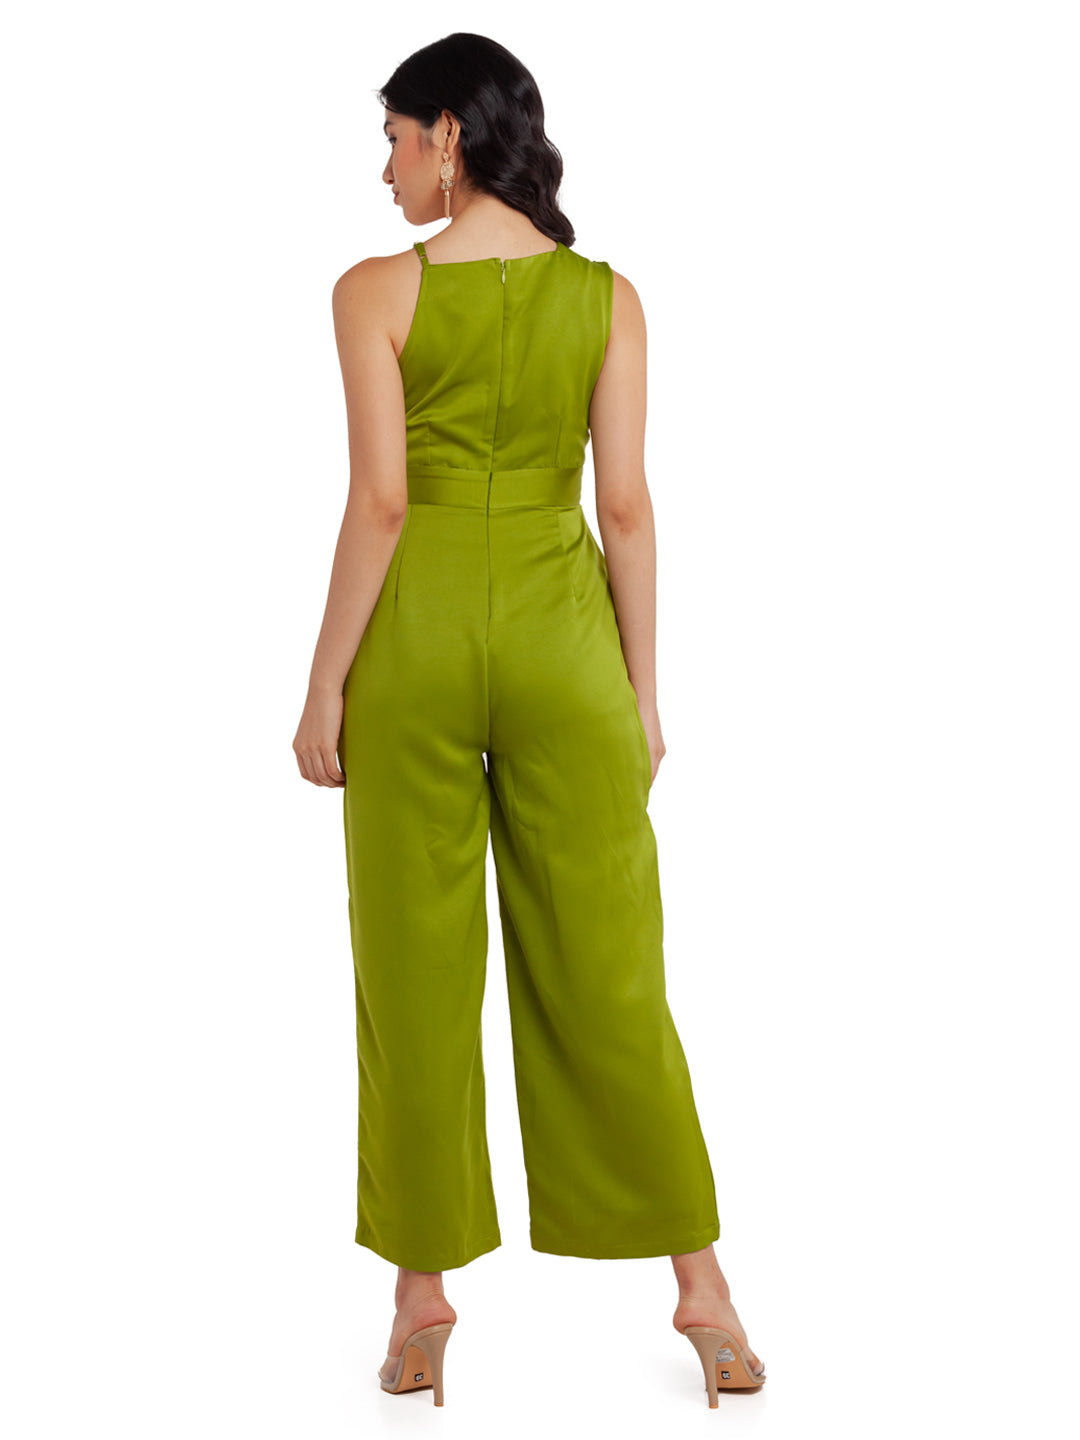 Green Solid Strappy Jumpsuit For Women